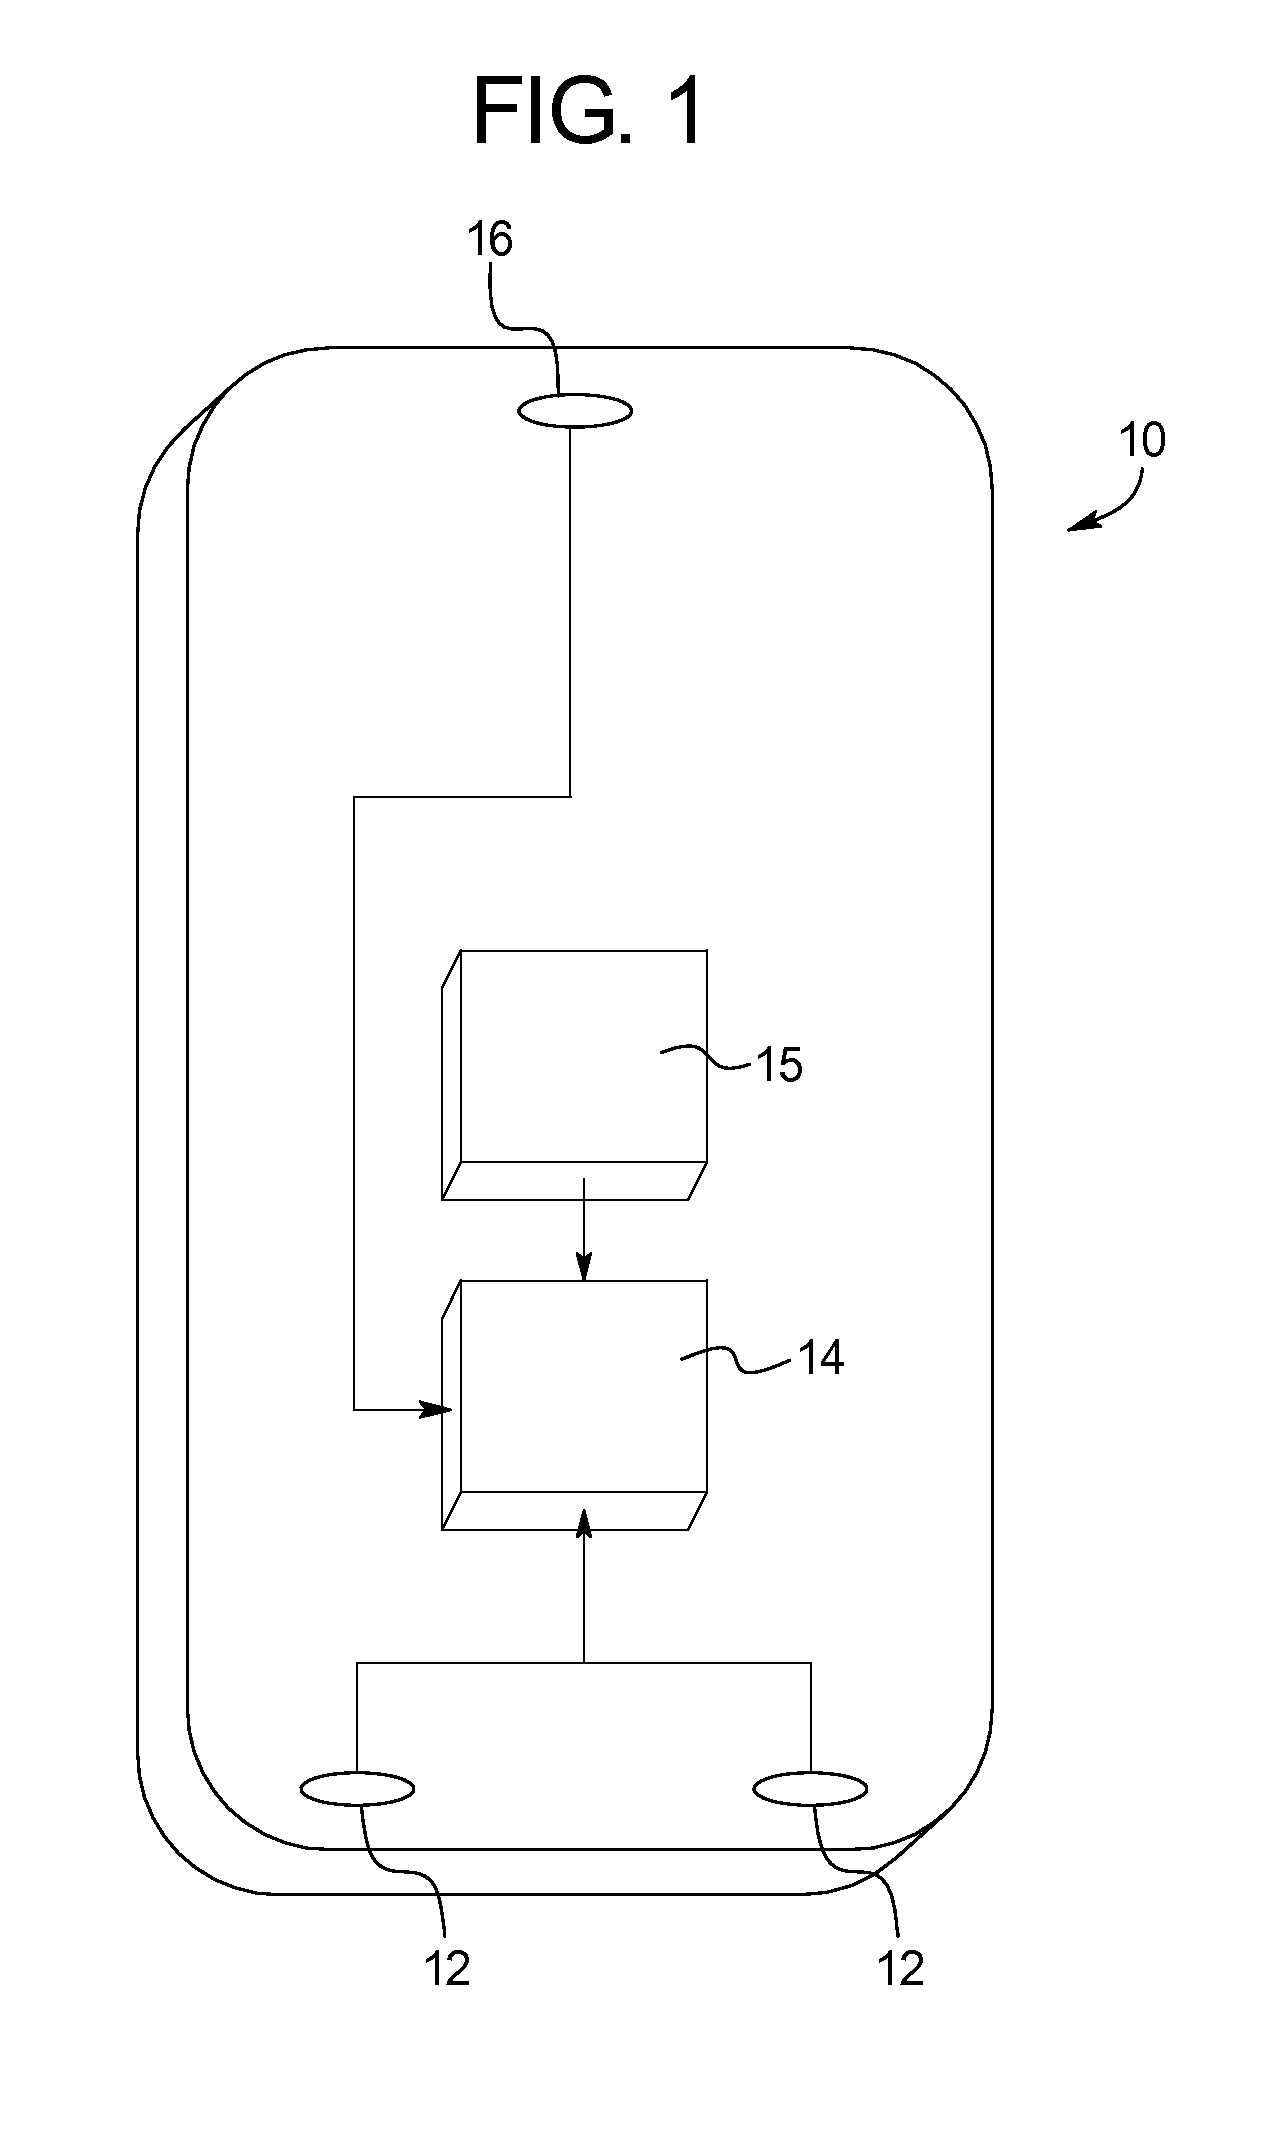 Noise reduction using direction-of-arrival information